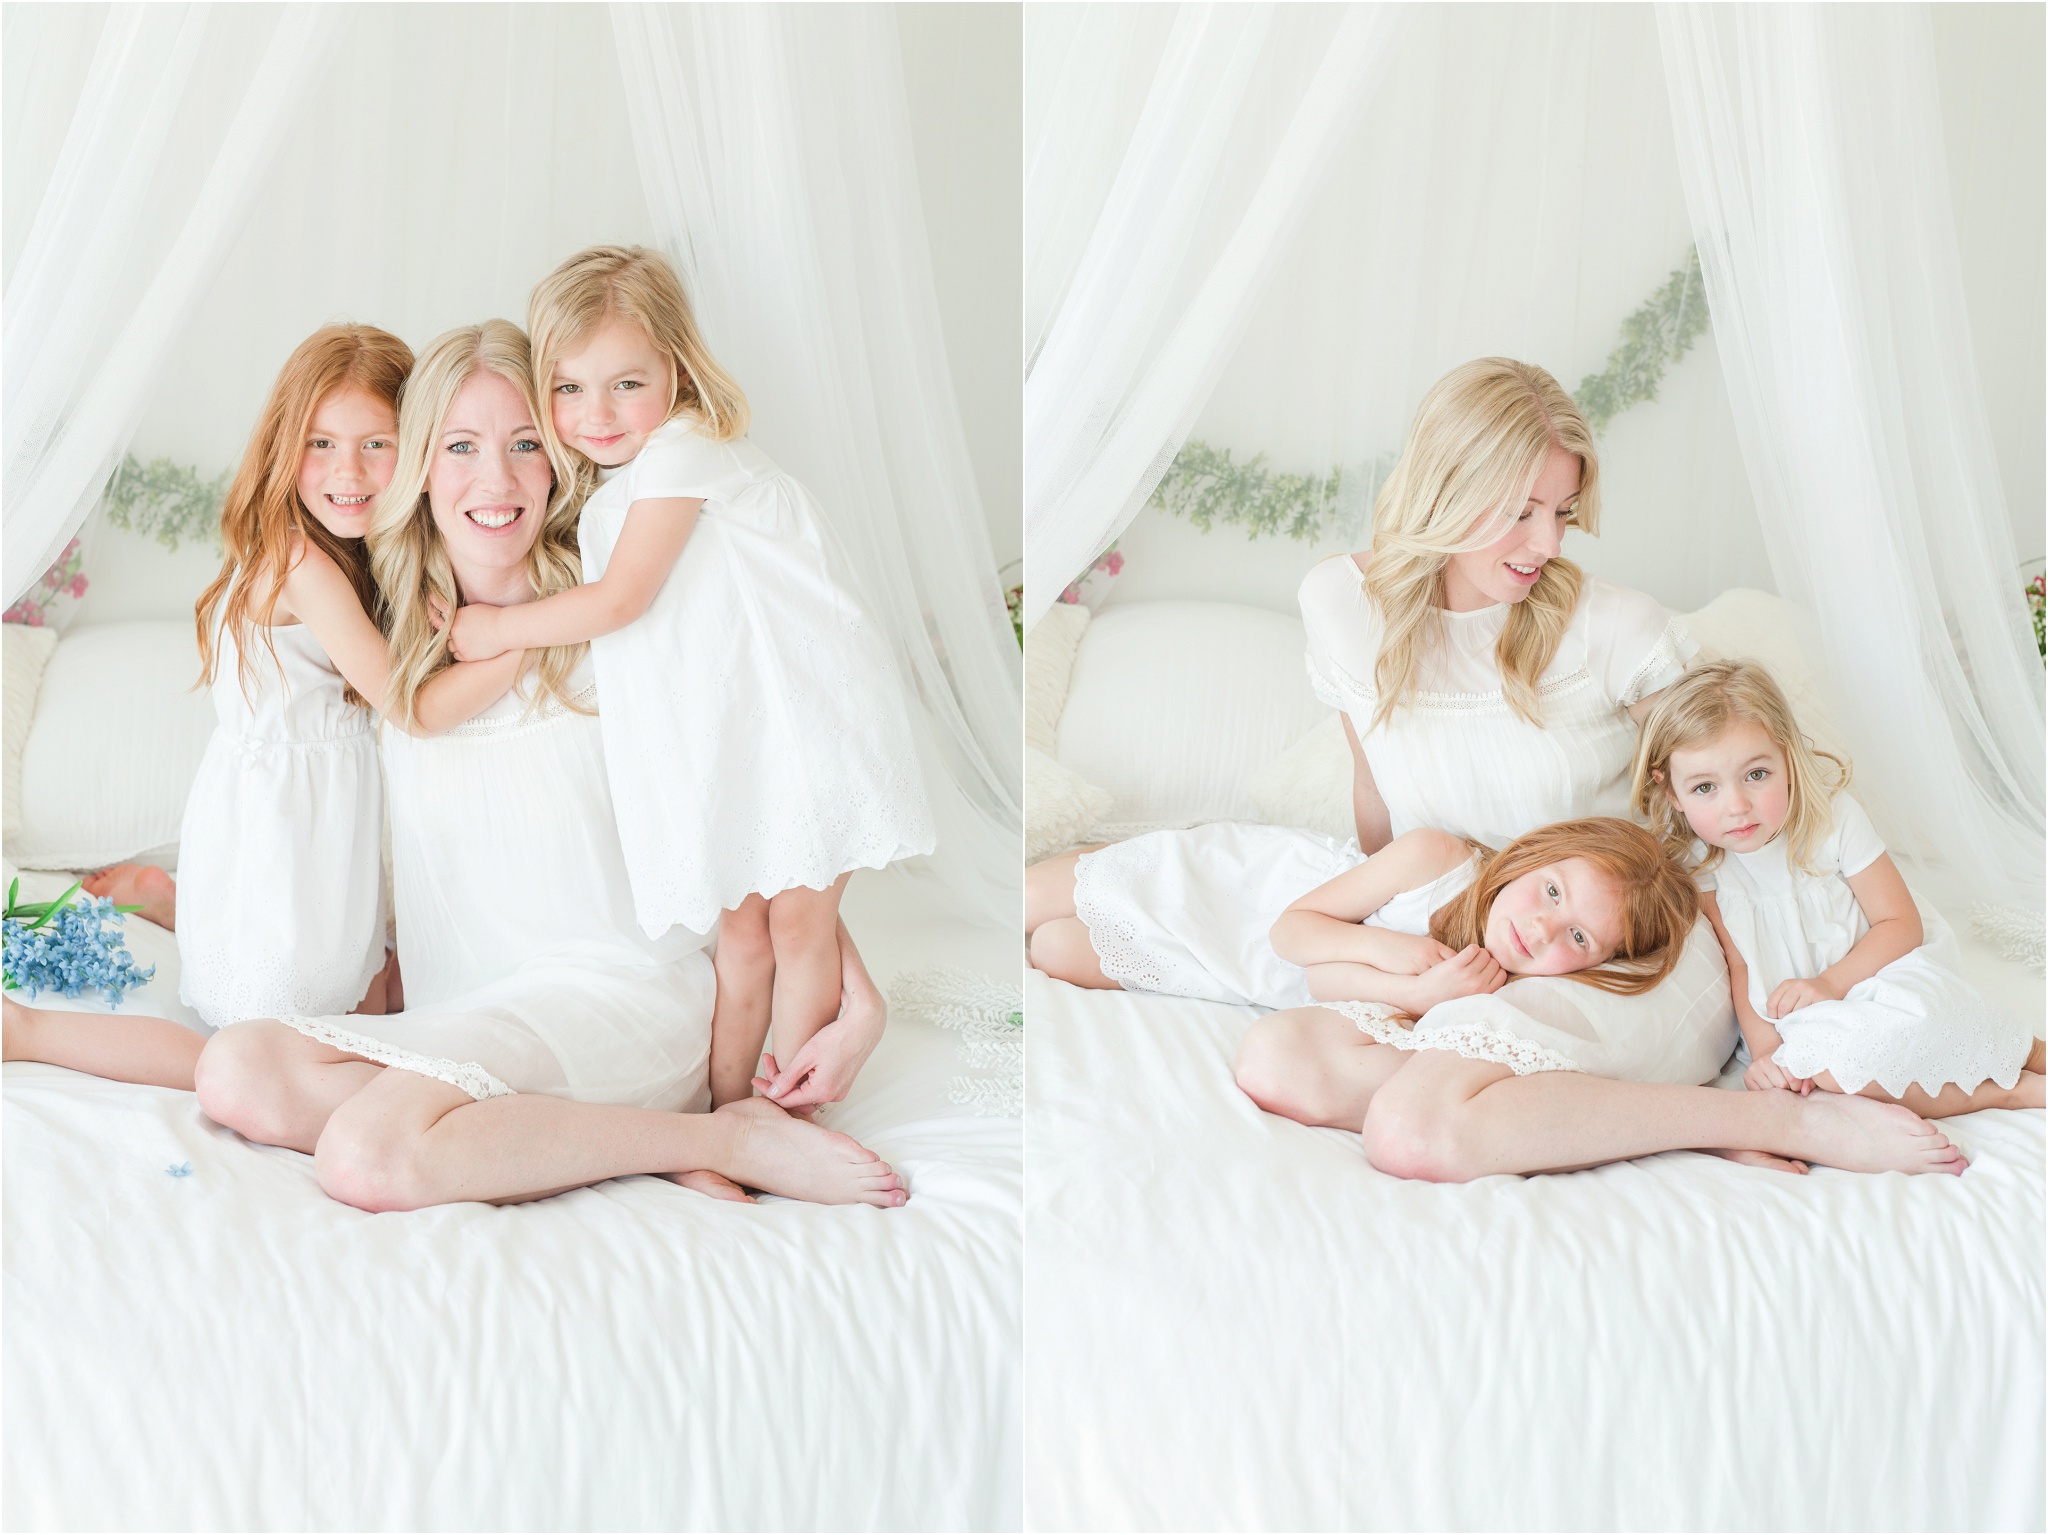 mommy and me photos, edmonton wedding photographer, edmonton family photographer, nc photography, light and airy, studio mommy and me photos